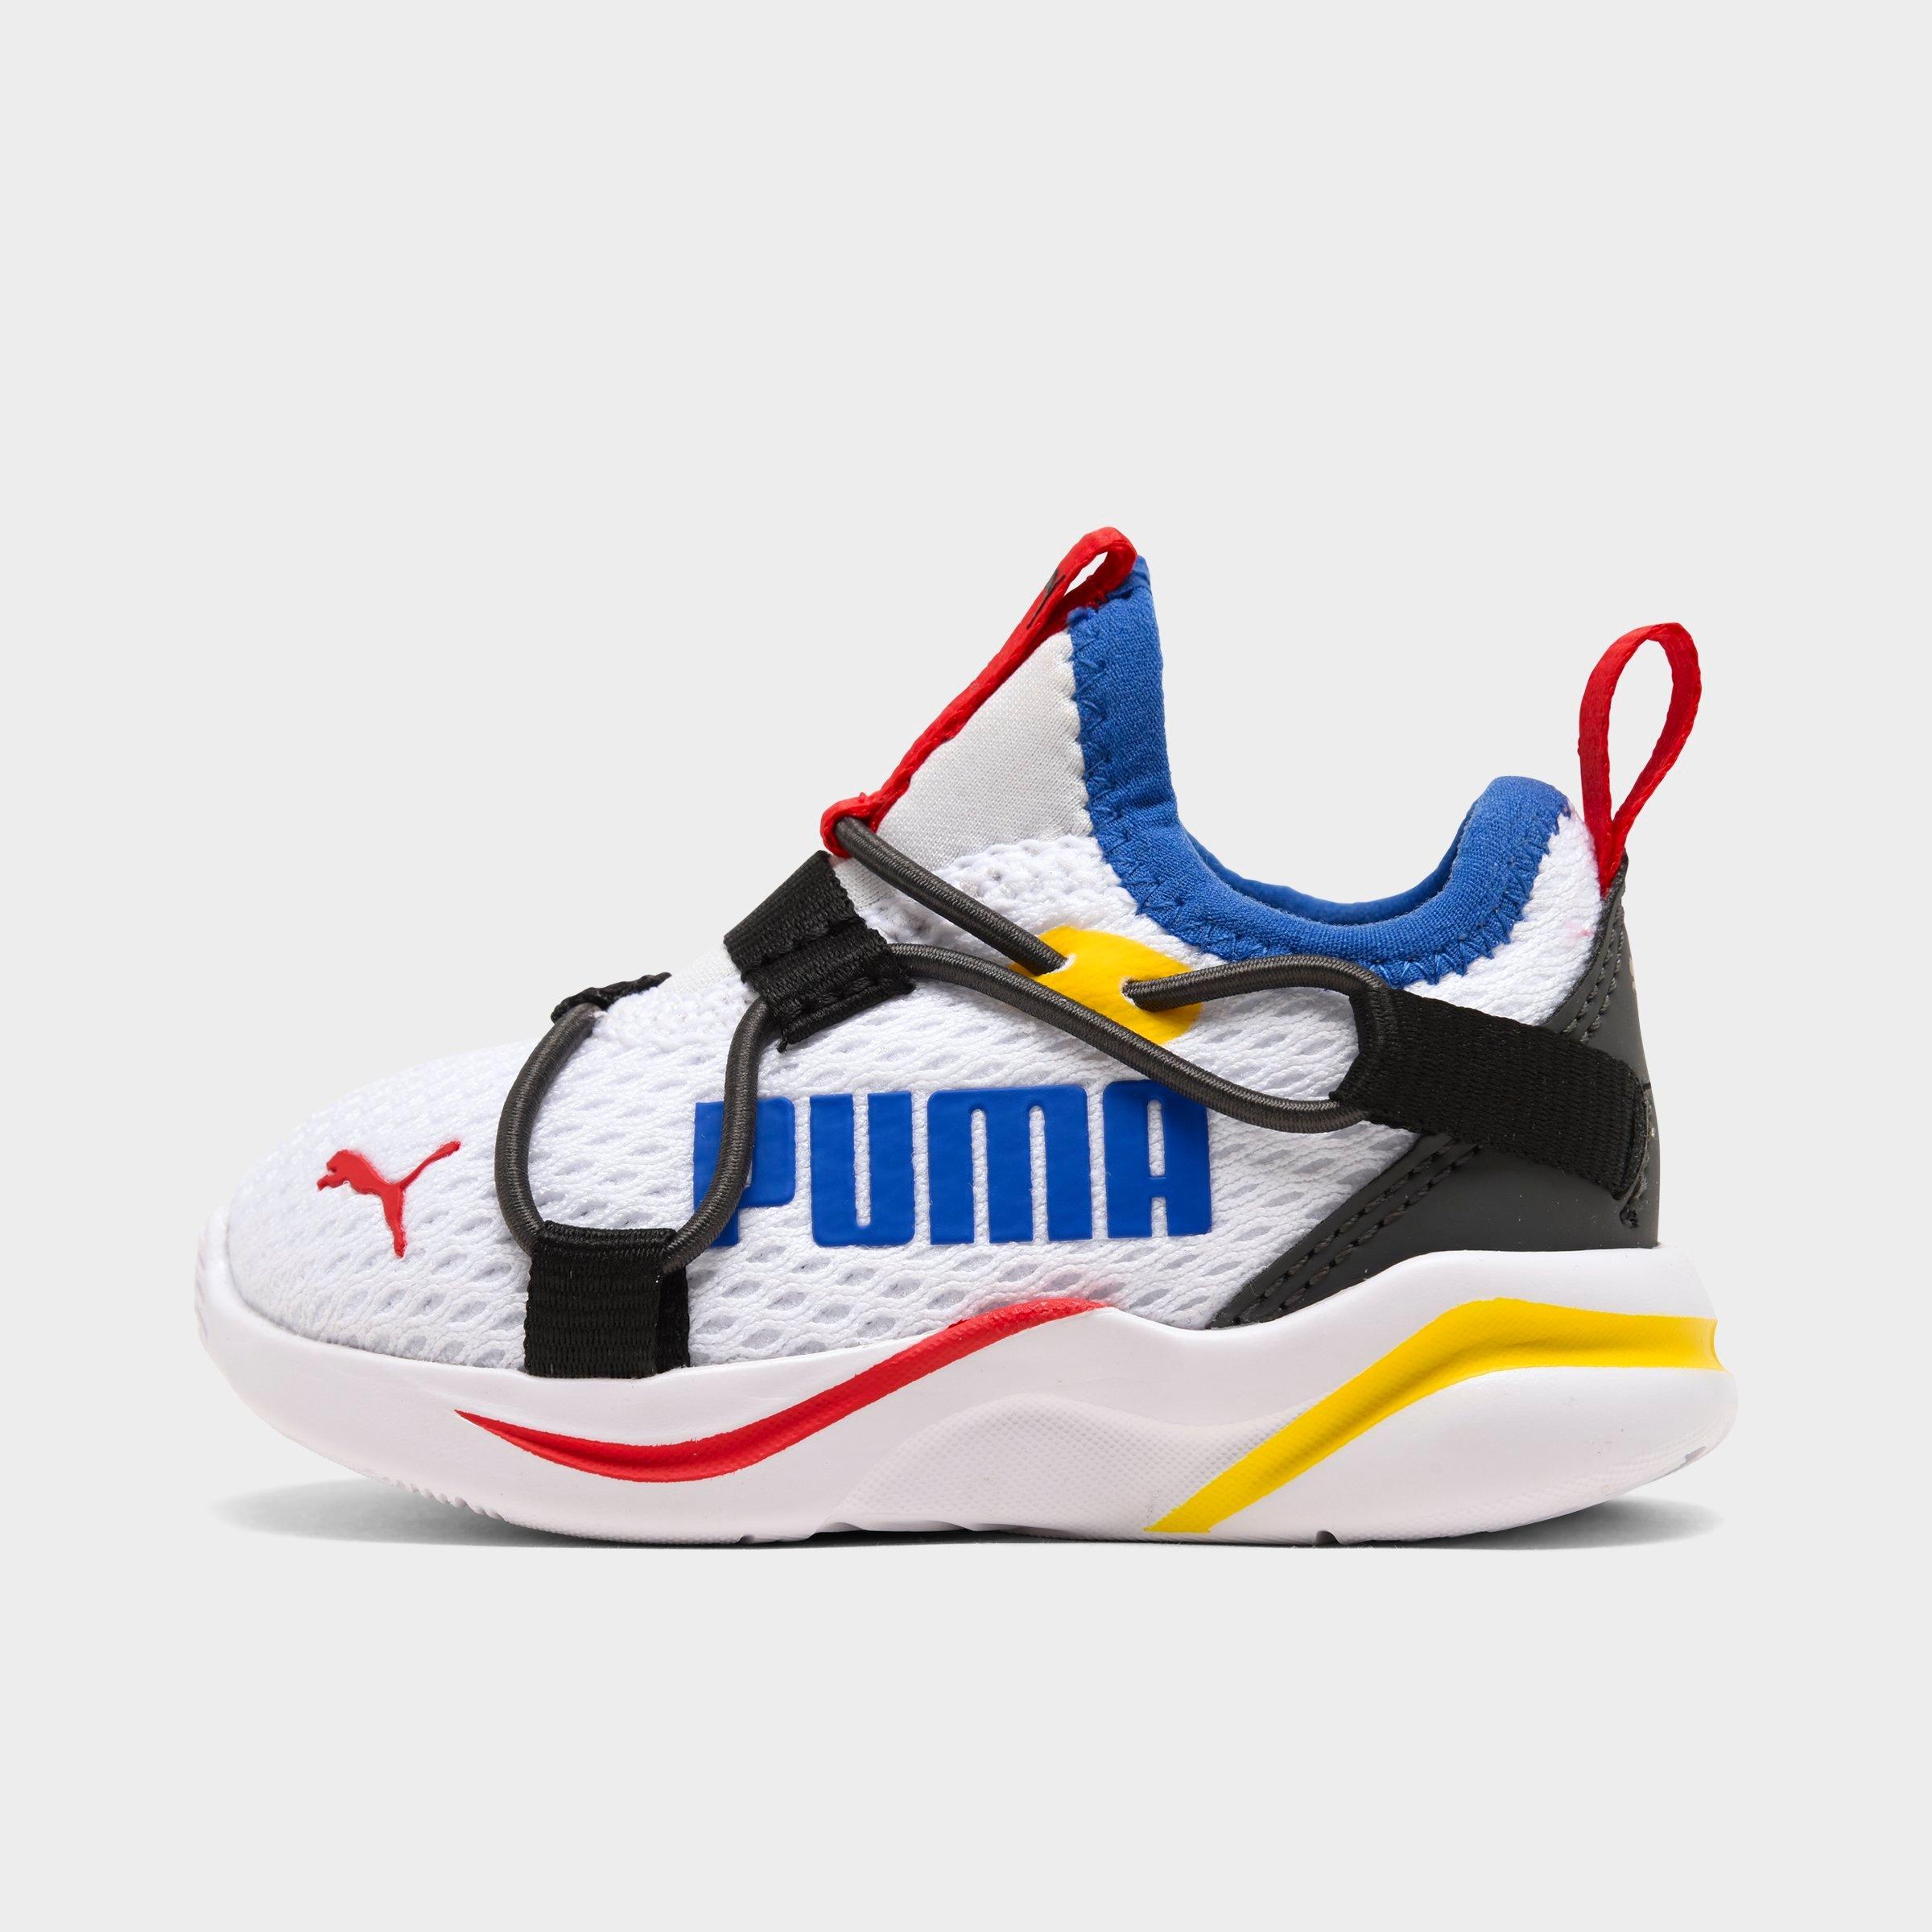 the new puma shoes